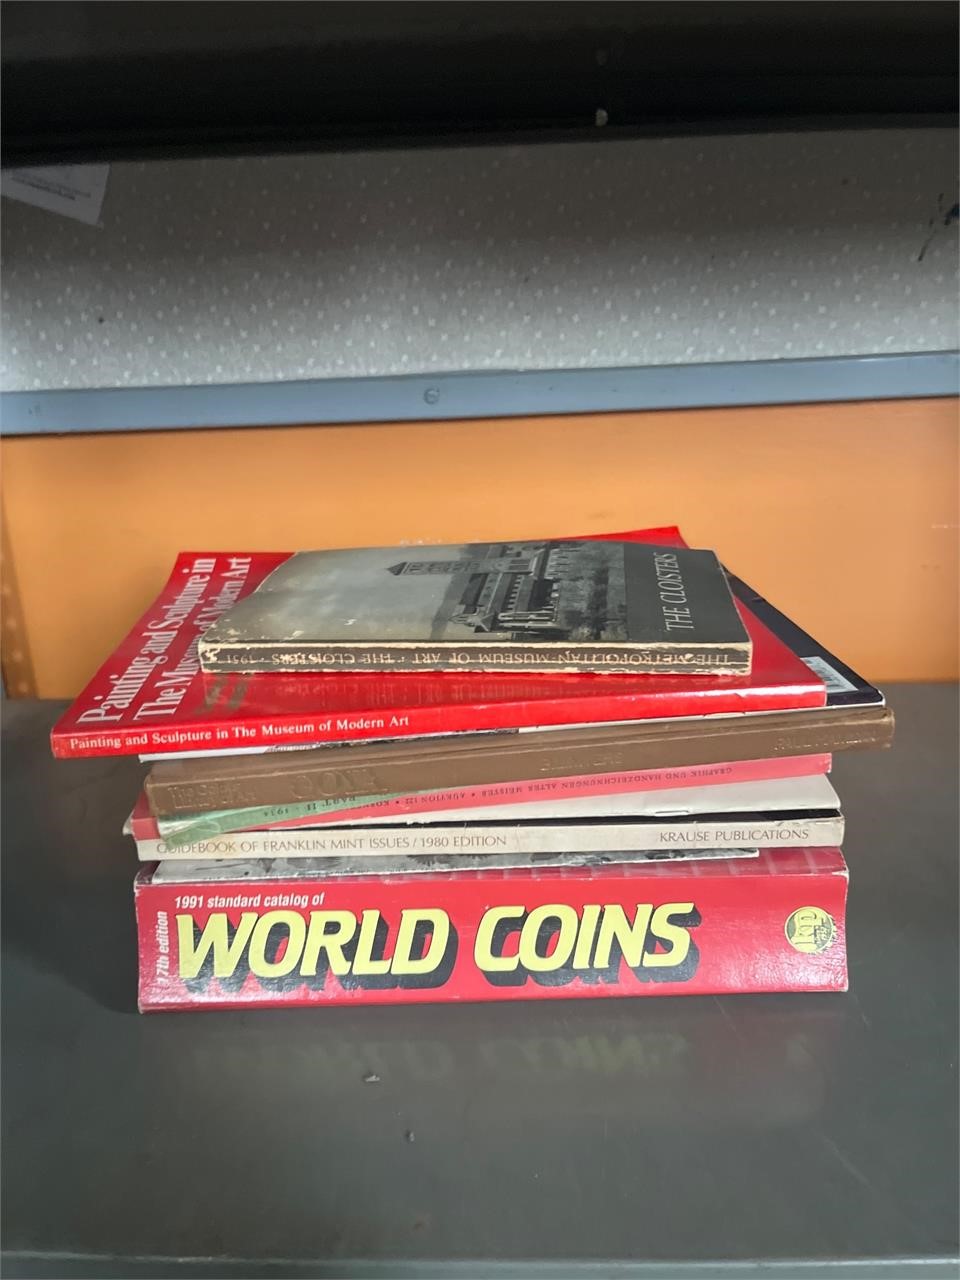 World Coins book and other books